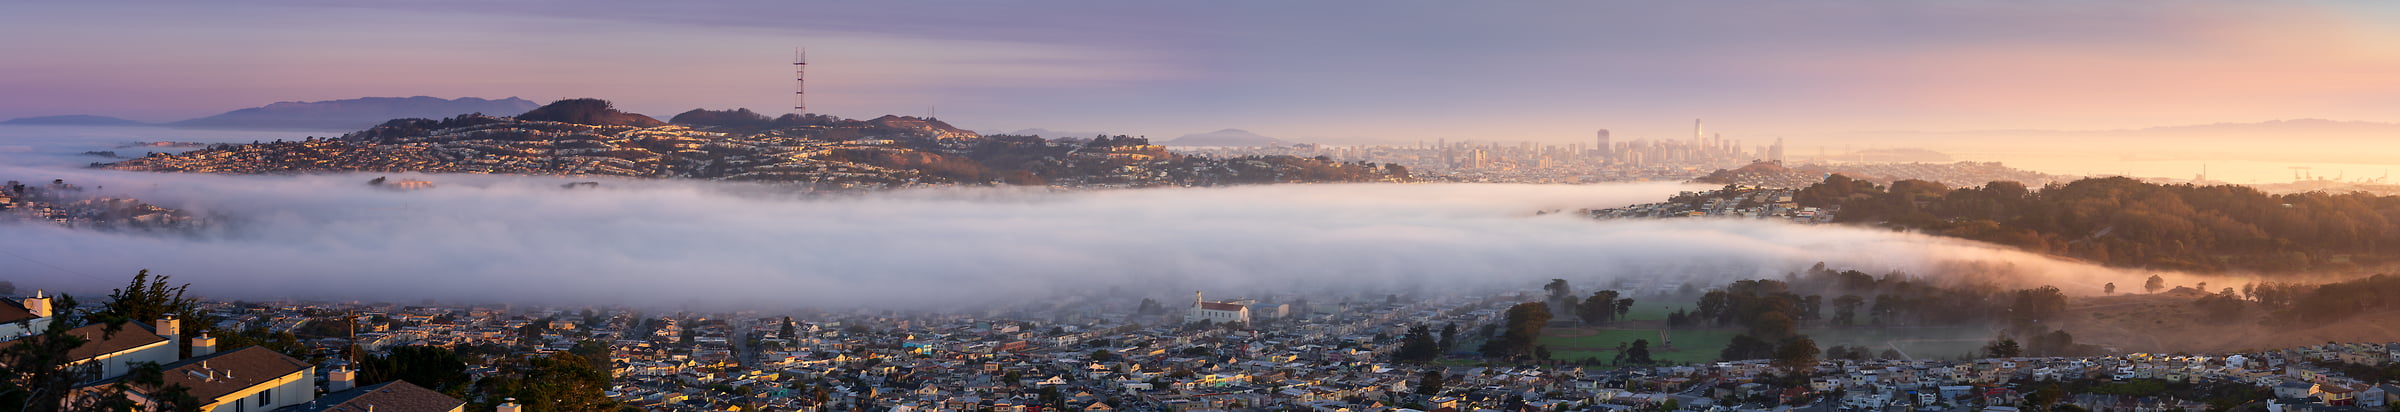 365 megapixels! A very high resolution panorama photo of the San Francisco skyline with fog at sunrise; cityscape photograph created by Jeff Lewis in San Francisco, California